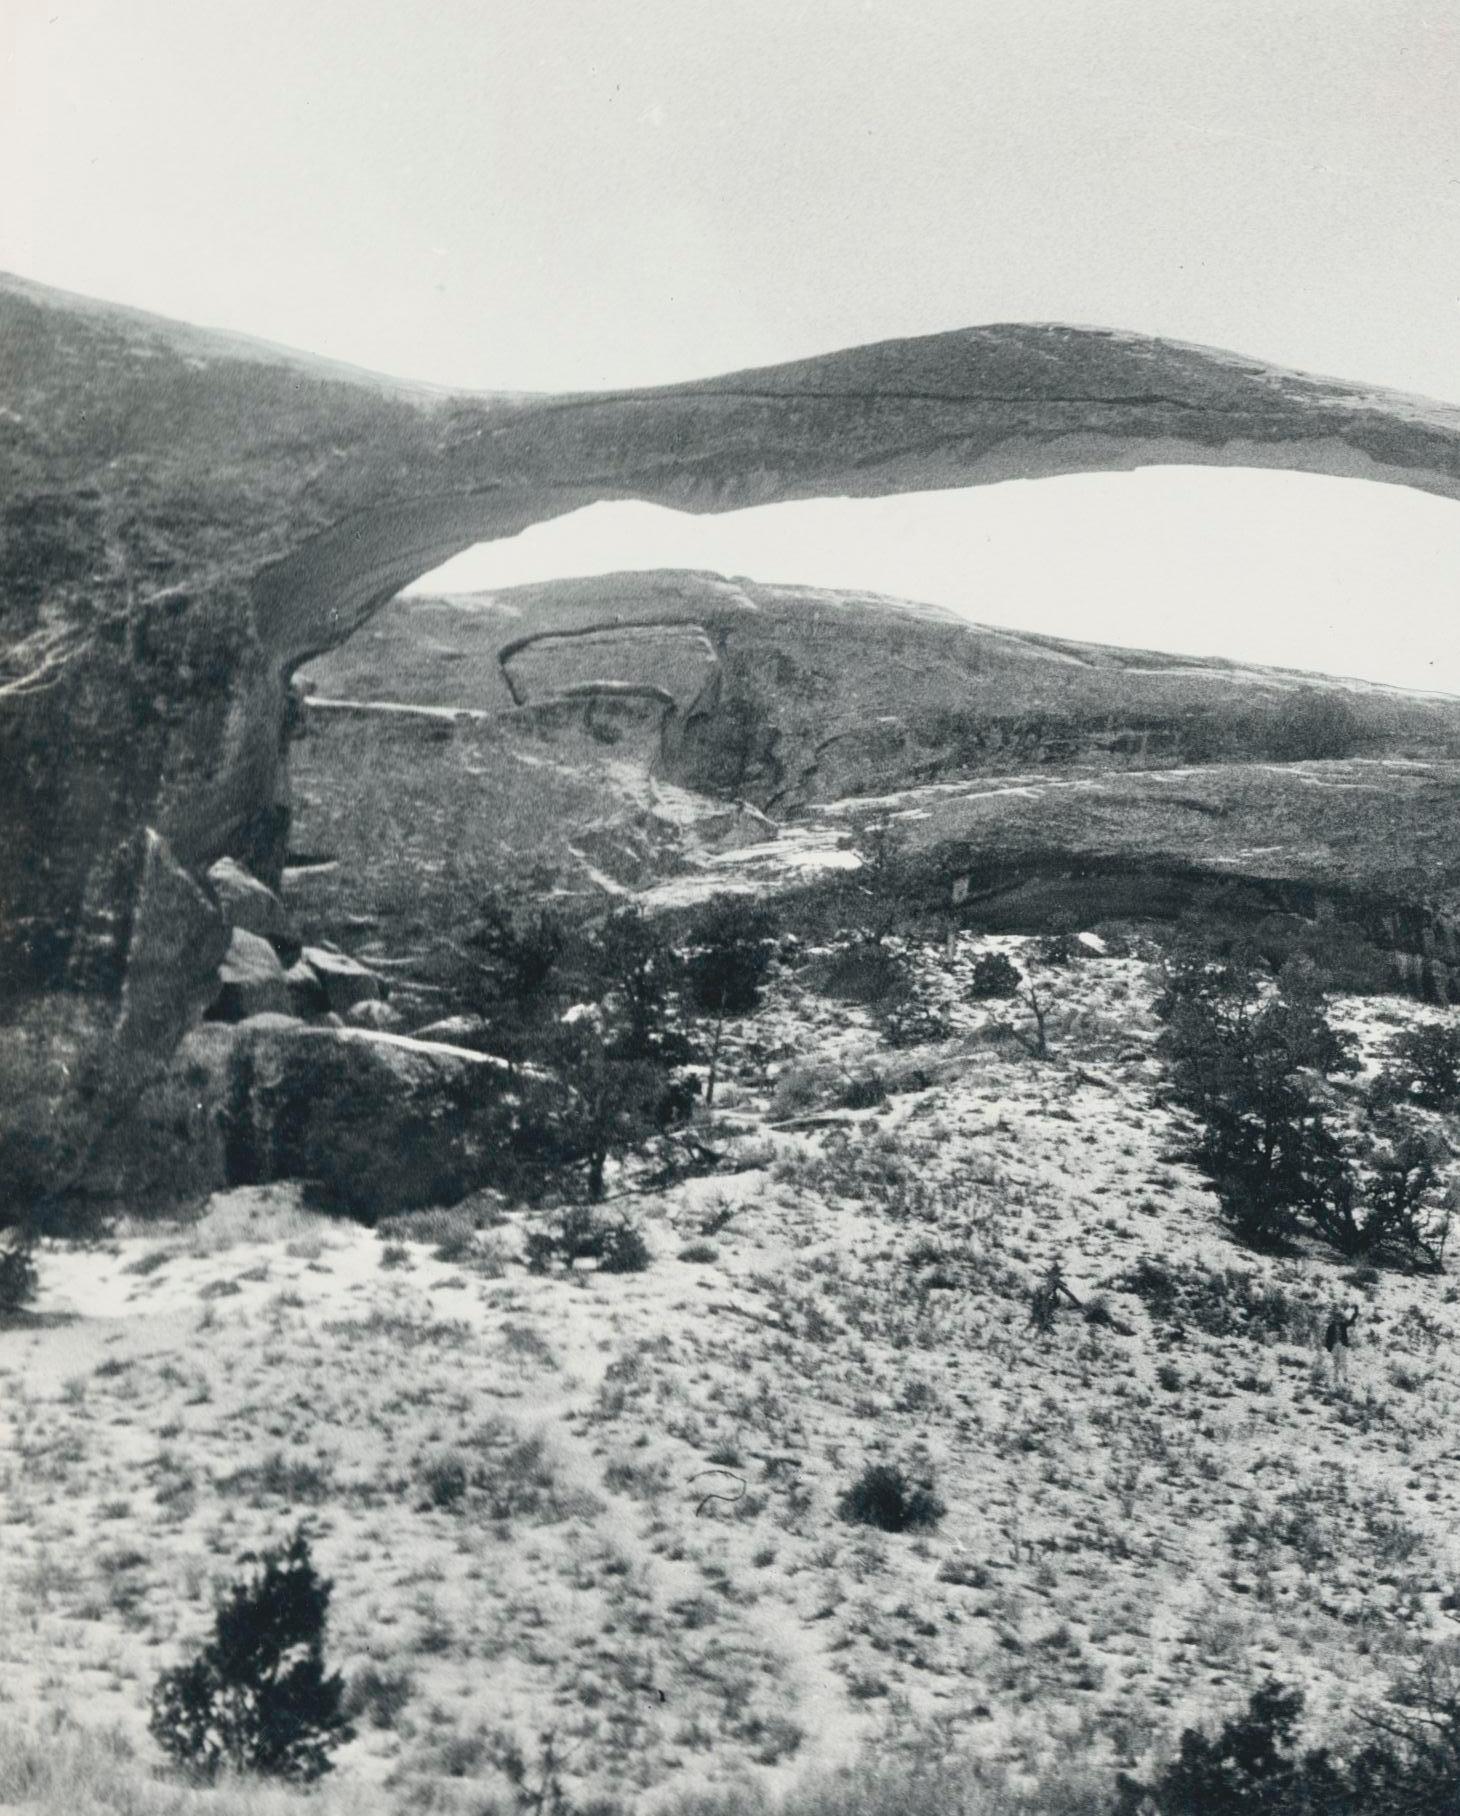 Arches Nationalpark, Black and White, USA 1960s, 17, 1 x 23, 5 cm - Modern Photograph by Erich Andres